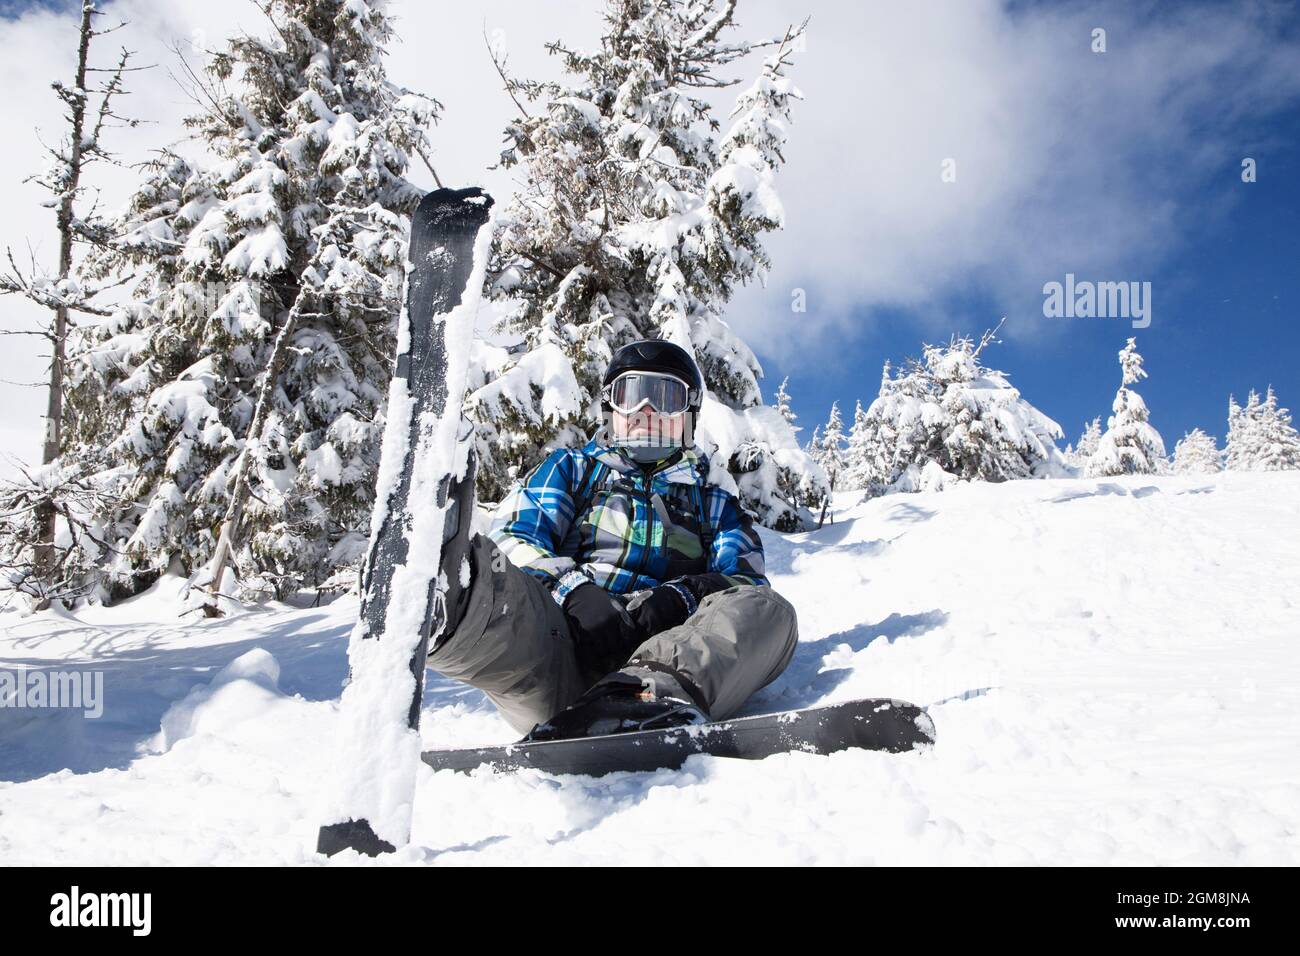 man of about 35-40 years old in winter clothes on skis sits in the snow on a sunny winter day. skier enjoying winter holidays on a snowy slope, relaxa Stock Photo